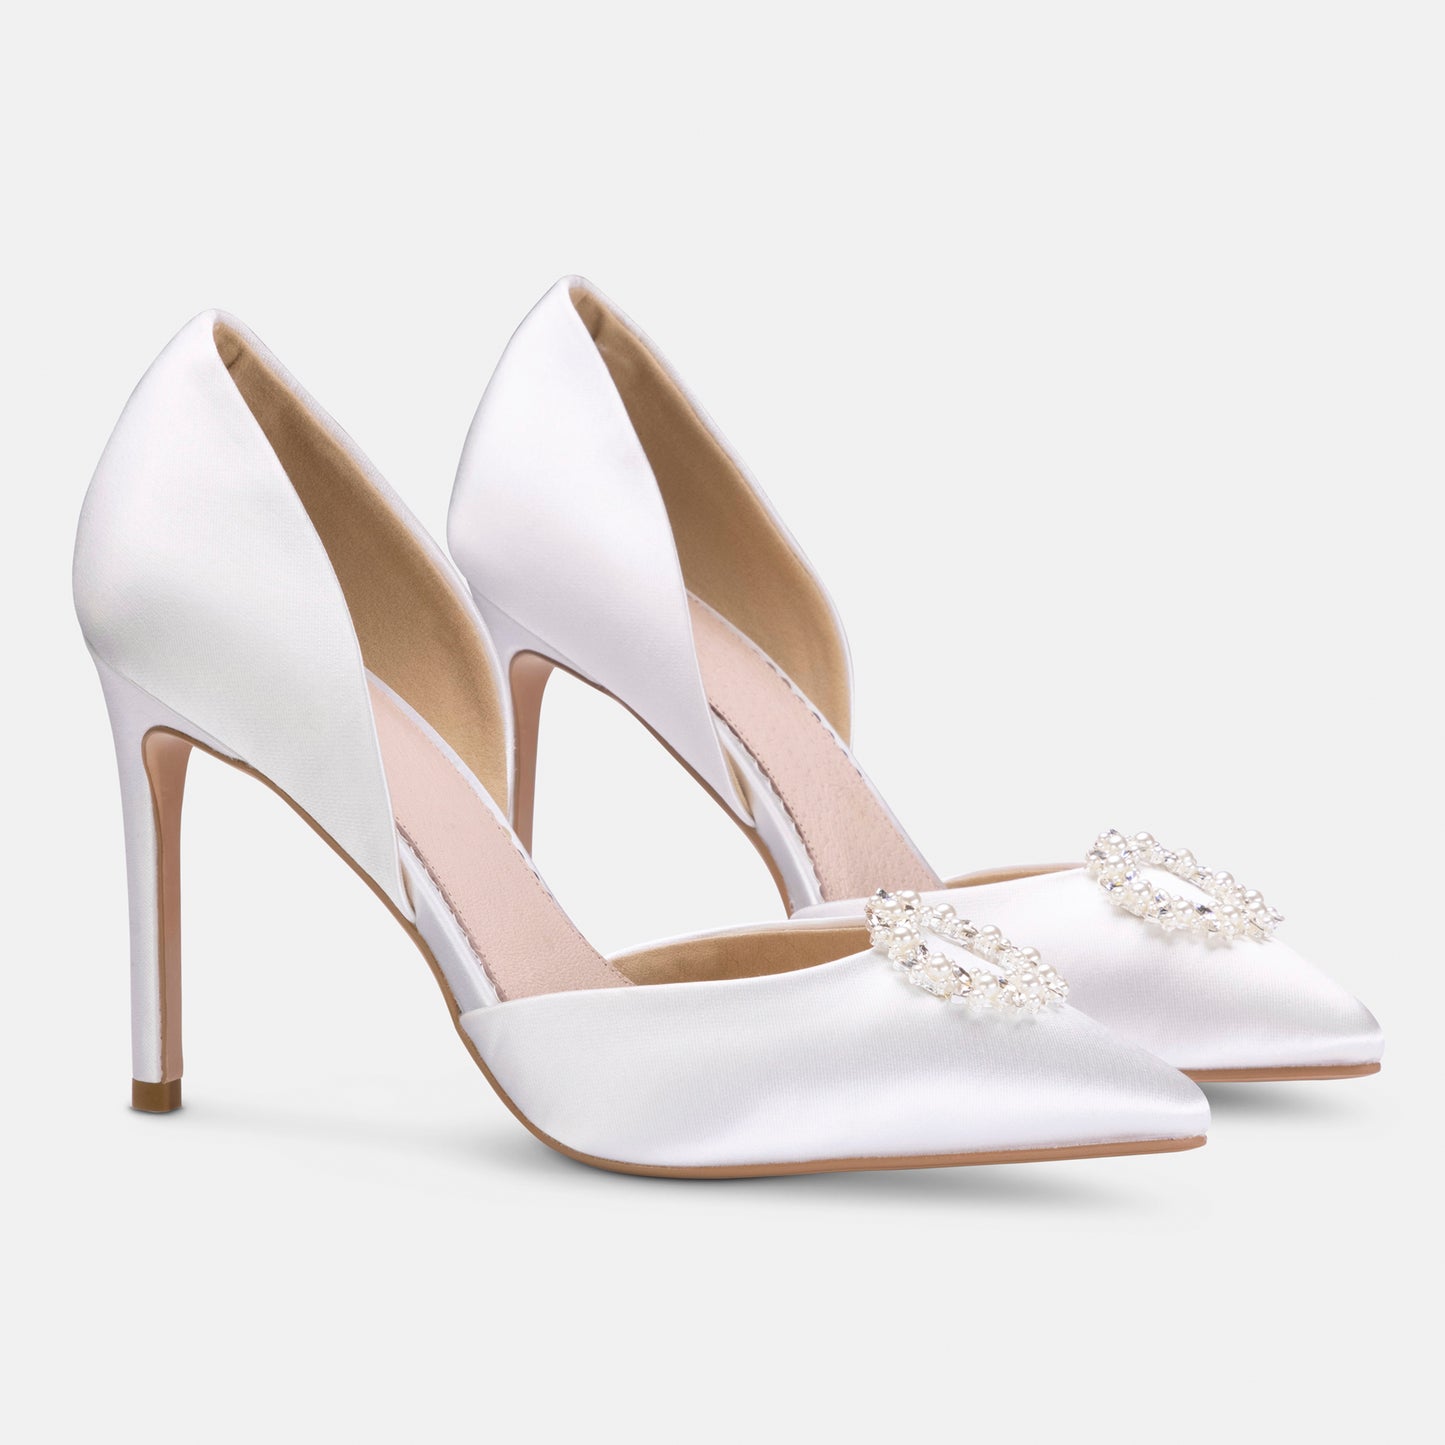 Pippa ivory diamante and pearl courts